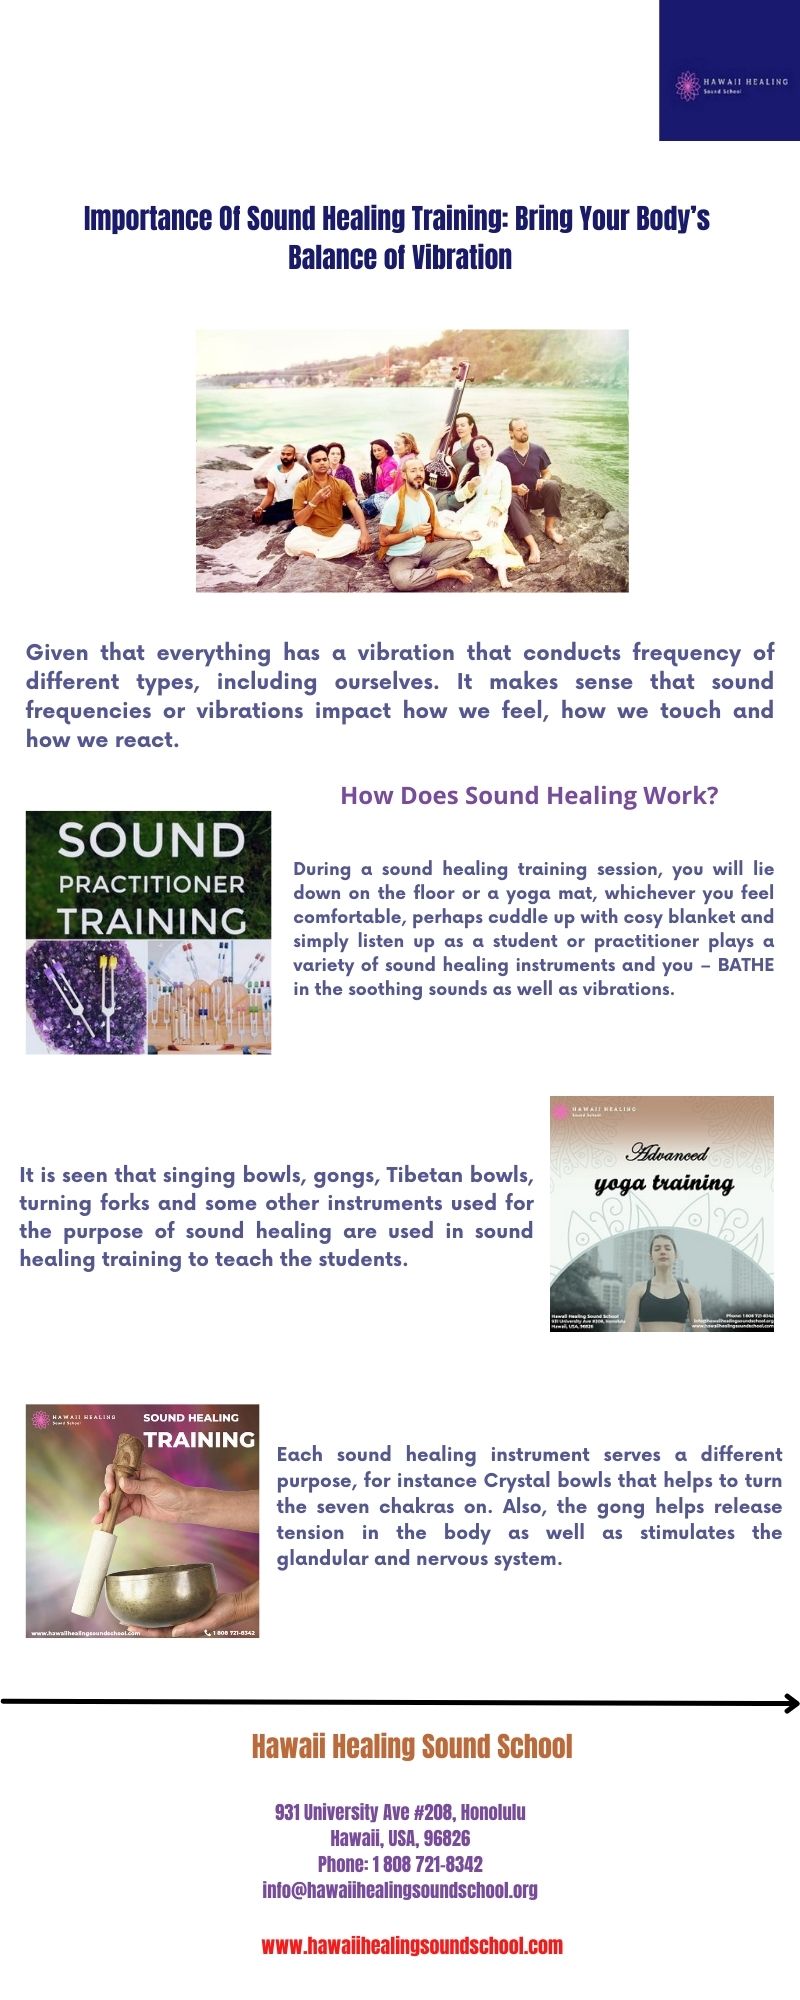 Importance Of Sound Healing Training: Bring Your Body’s Balance of Vibration There are many different things to know about sound healing, and a great sound healing training can give you all knowledge about it. For more details, visit: https://www.hawaiihealingsoundschool.com/ by hawaiihealingusa